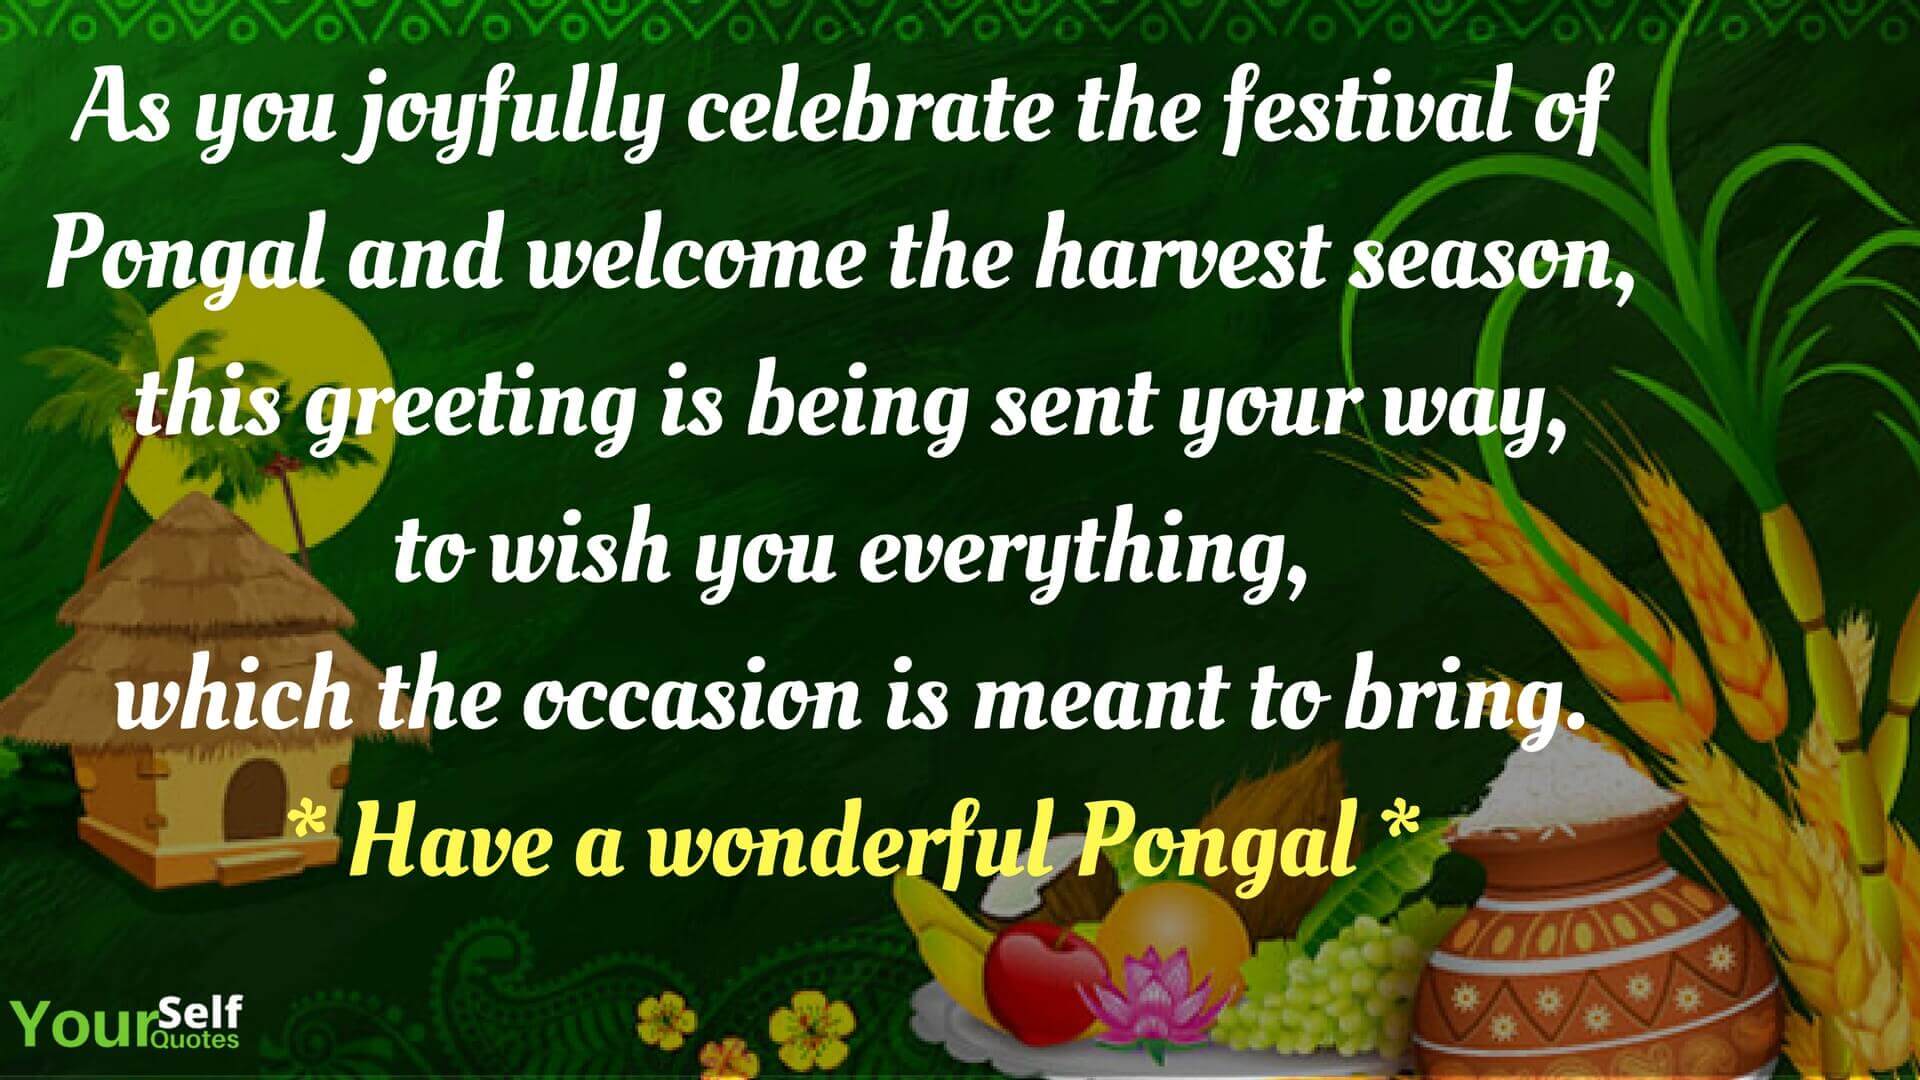 Happy Pongal Festival Wishes Photo - Happy Pongal Images Download , HD Wallpaper & Backgrounds